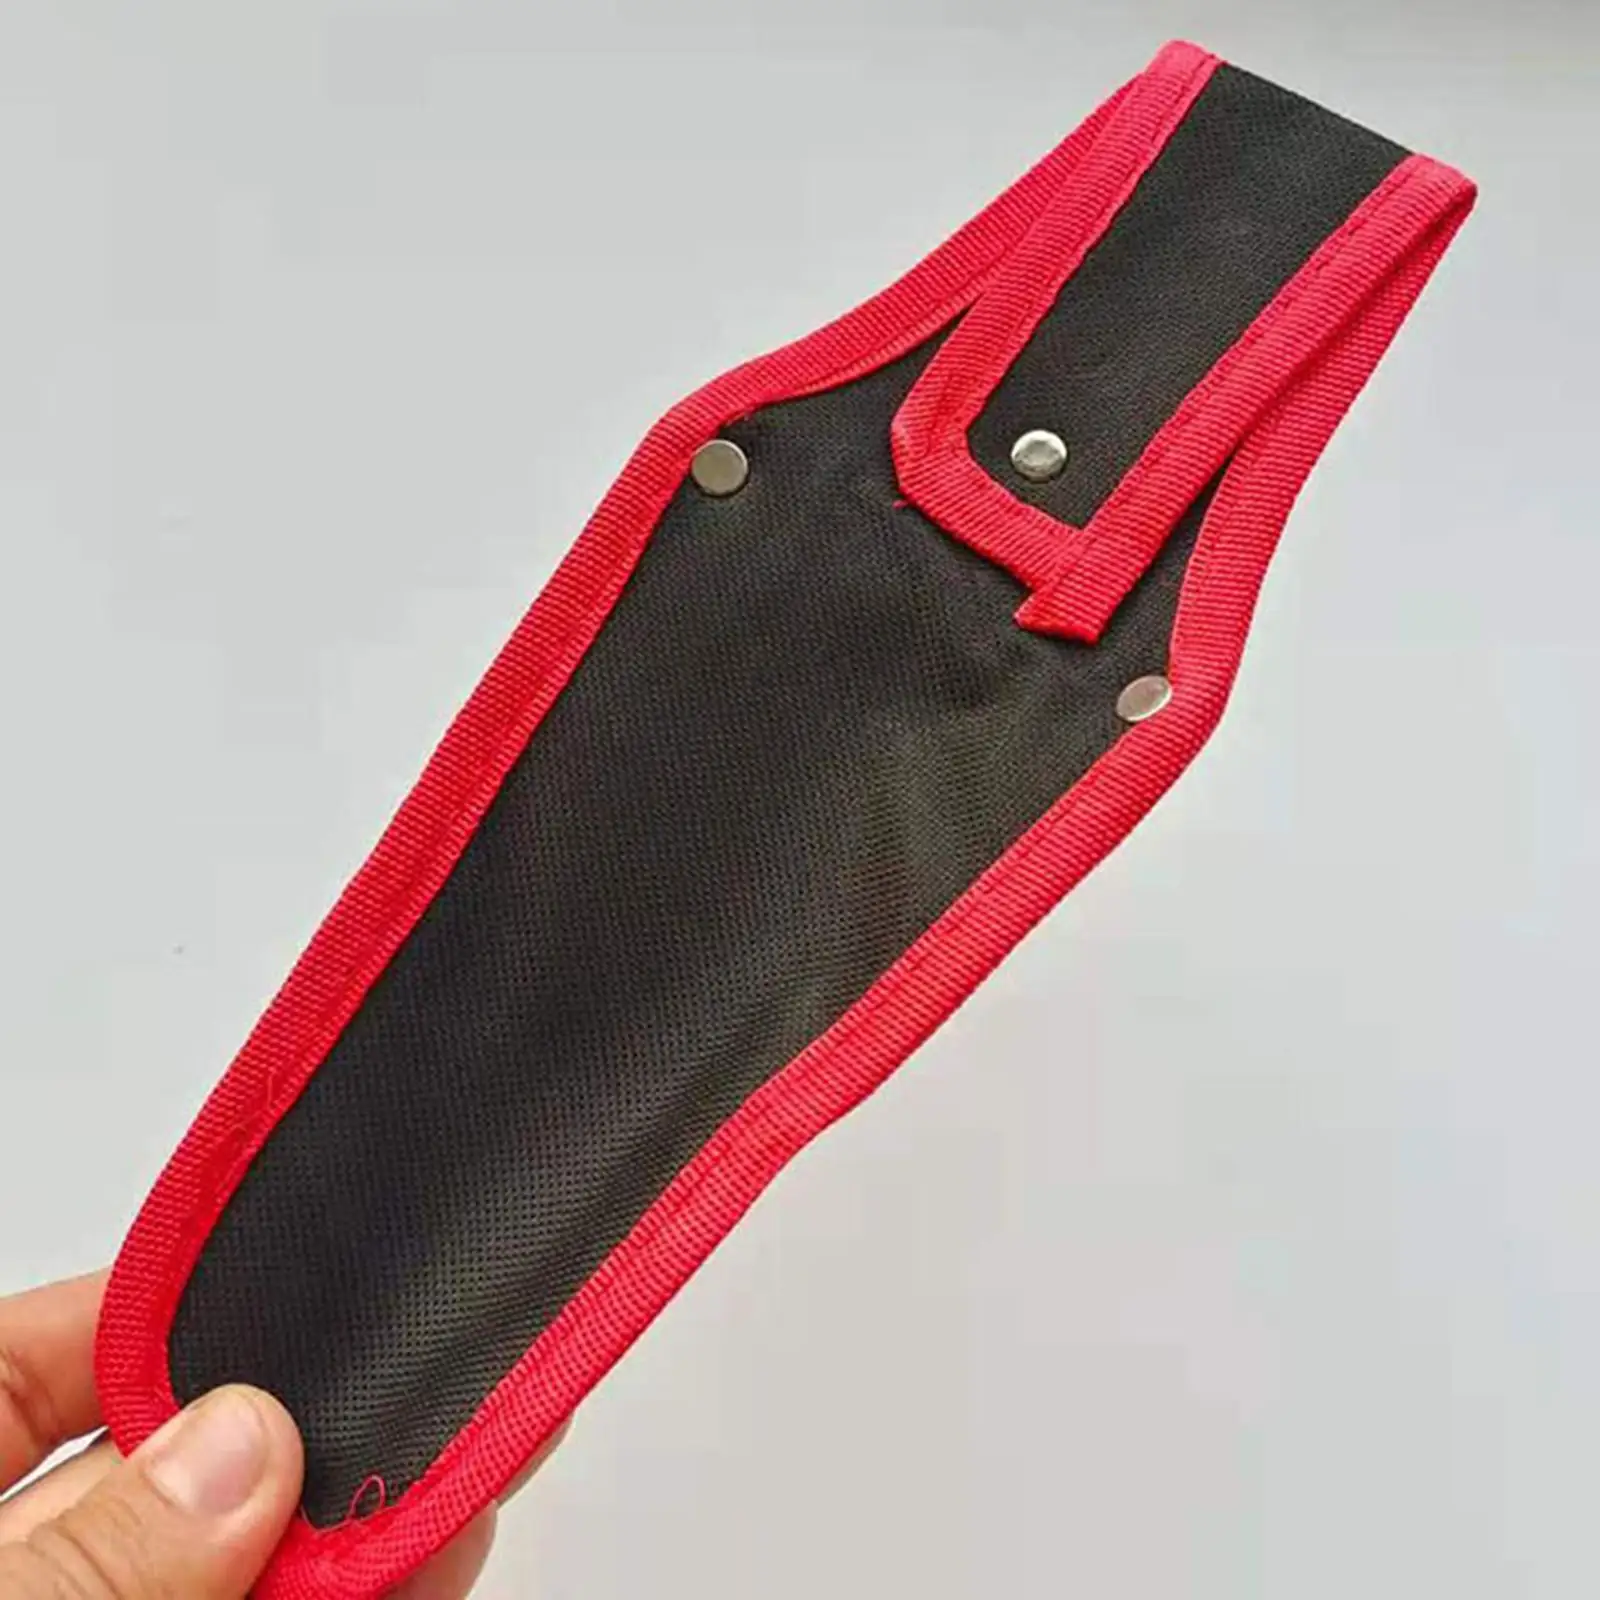 Pruner Sheath Protective Case Tool Belt Accessory Pruning Shear Holster for Pliers Shears Scissors Plant Shear Trimming Tools